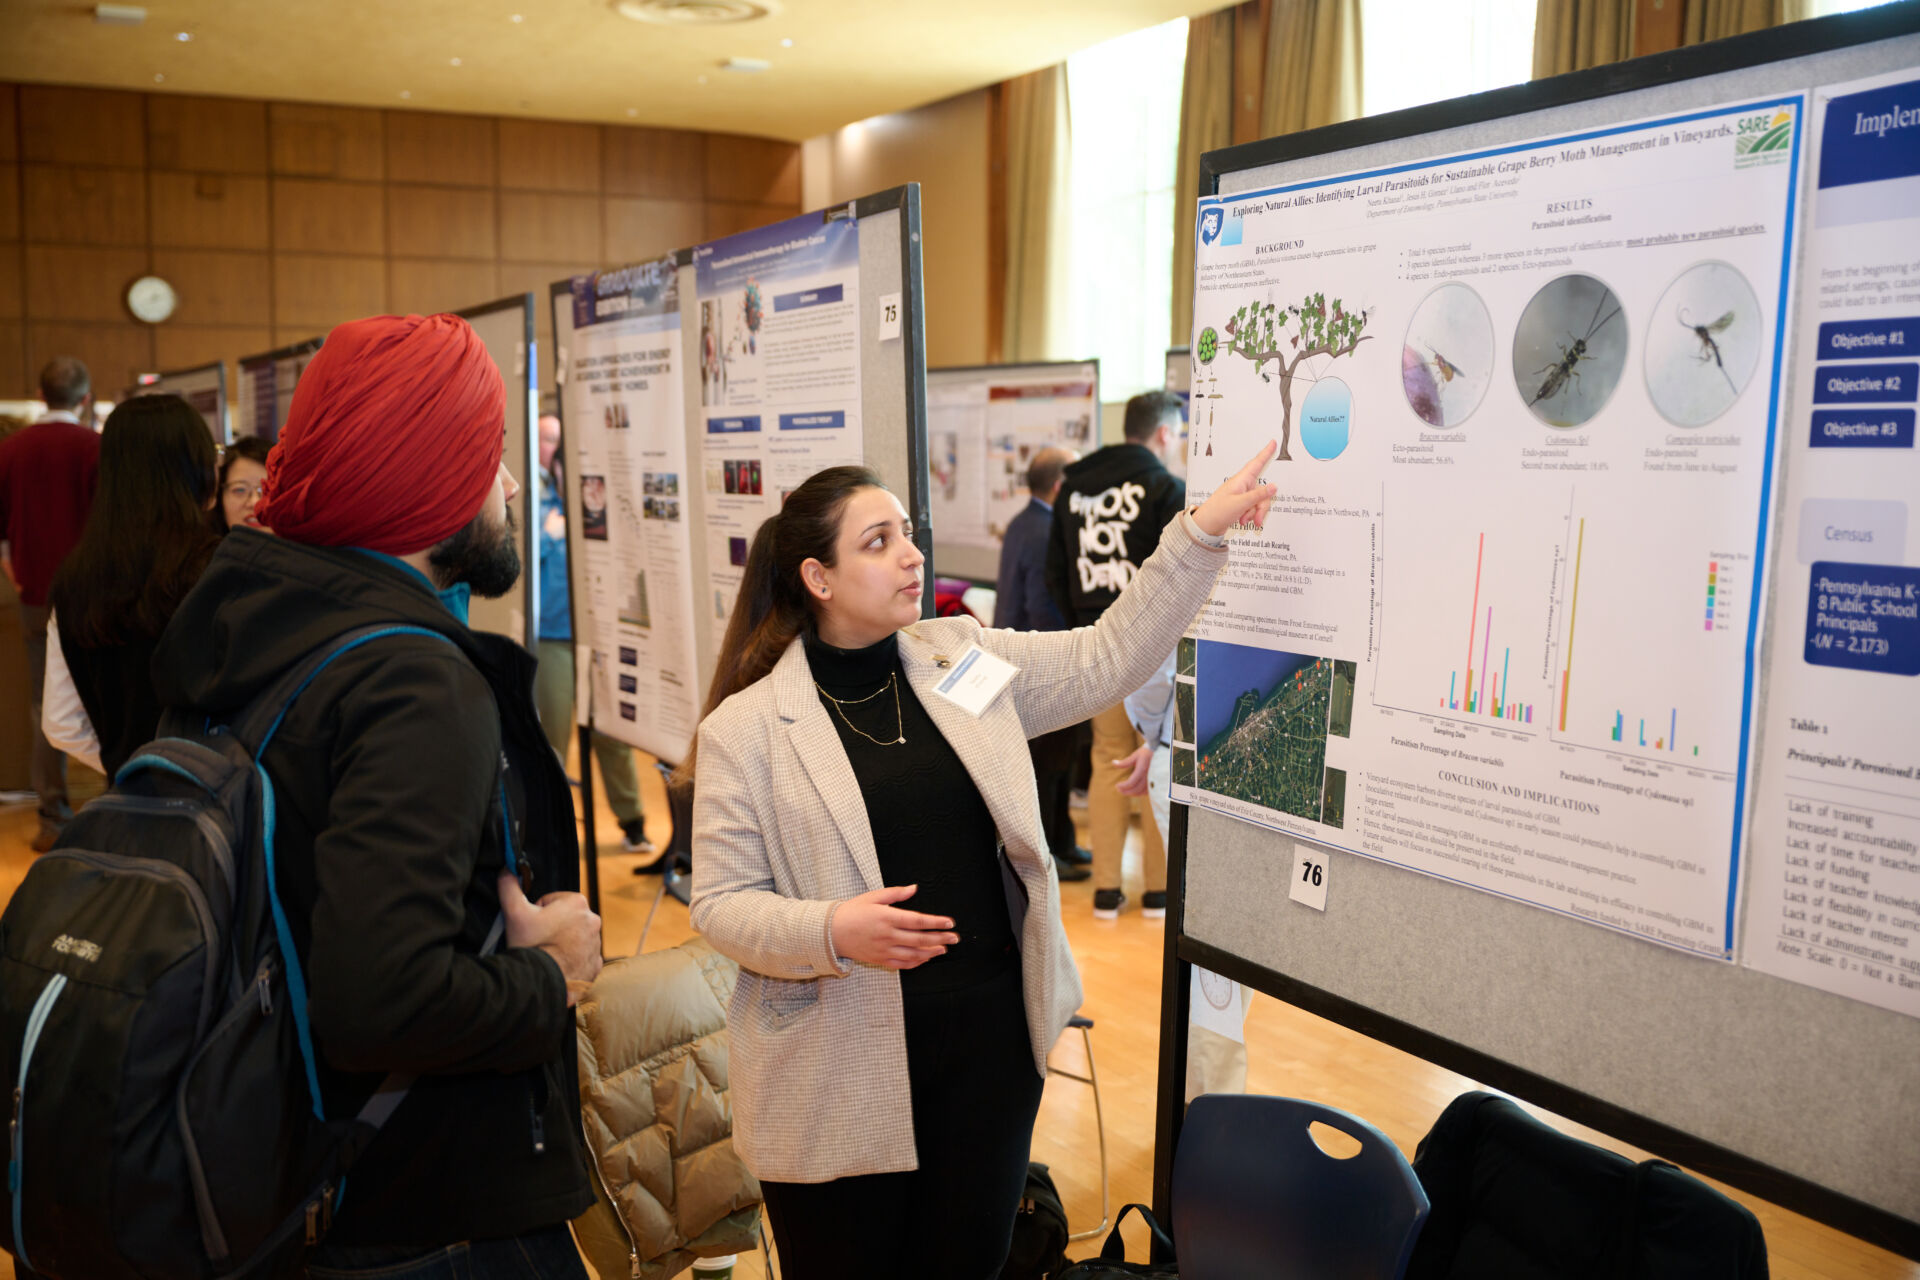 A graduate student presents their poster presentation to a judge at the annual Graduate Exhibition in Alumni Hall of the HUB-Robeson Center.